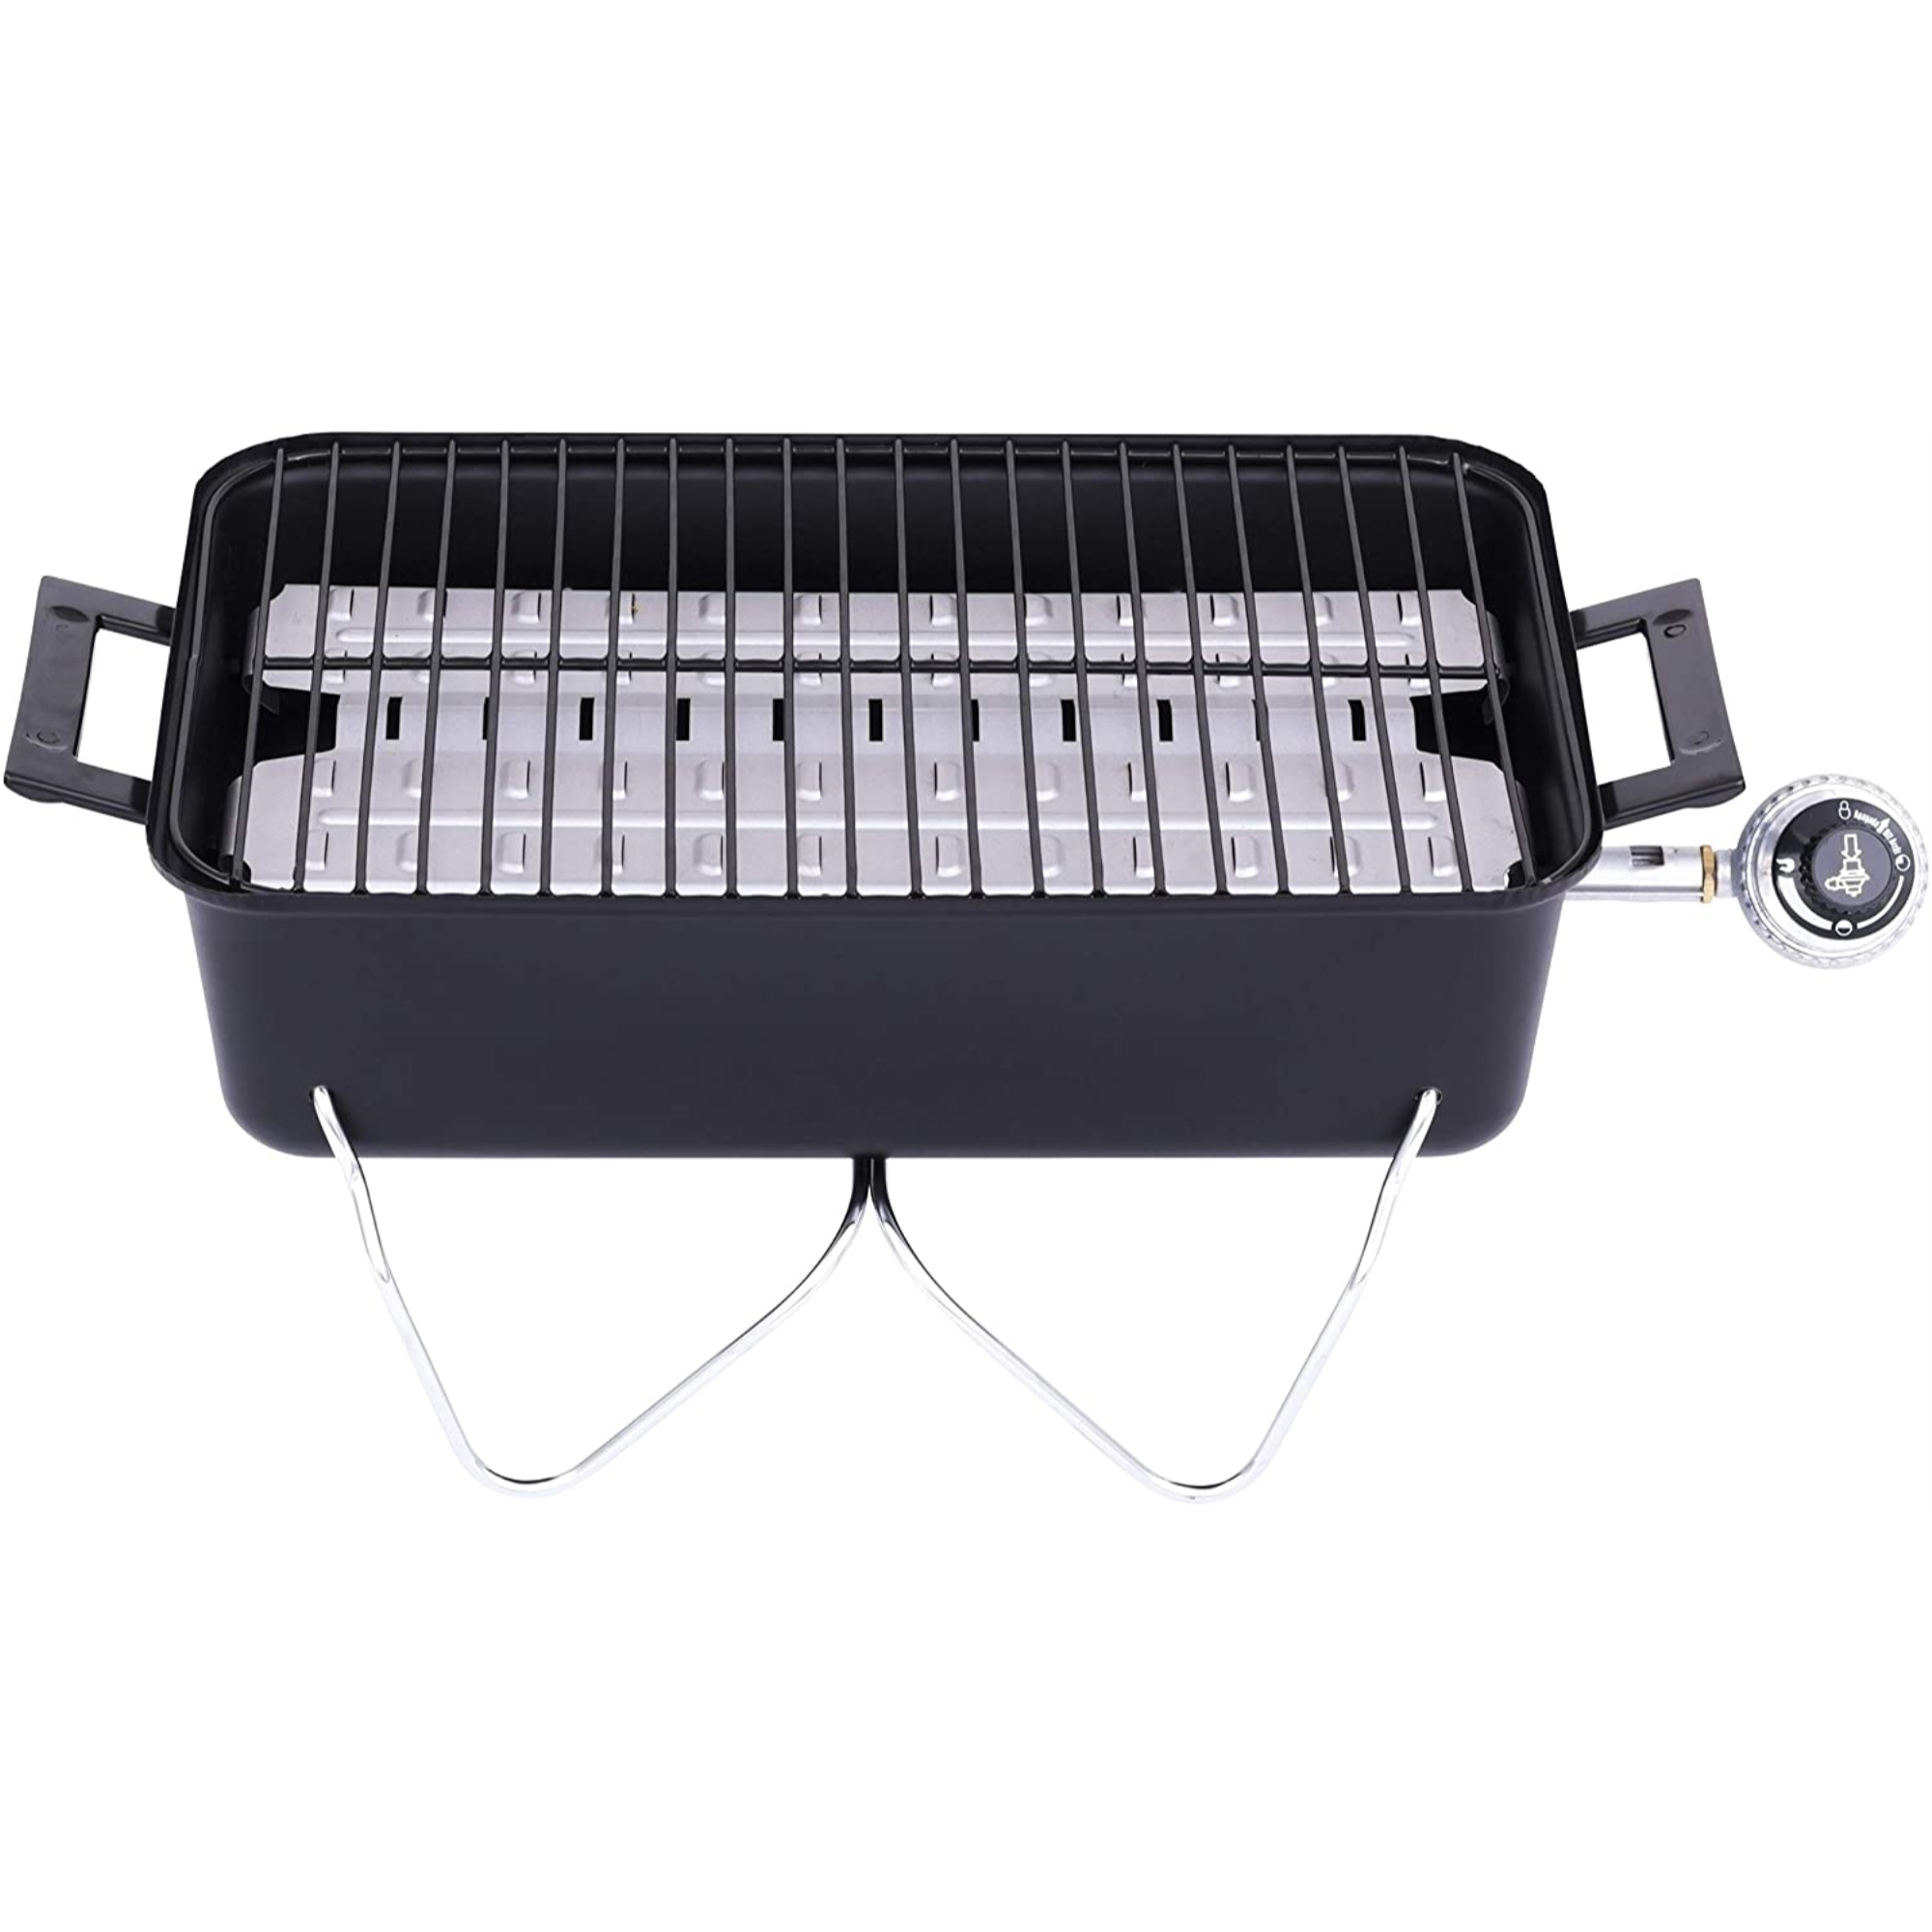 Char-Broil Portable Gas Grill - image 5 of 8